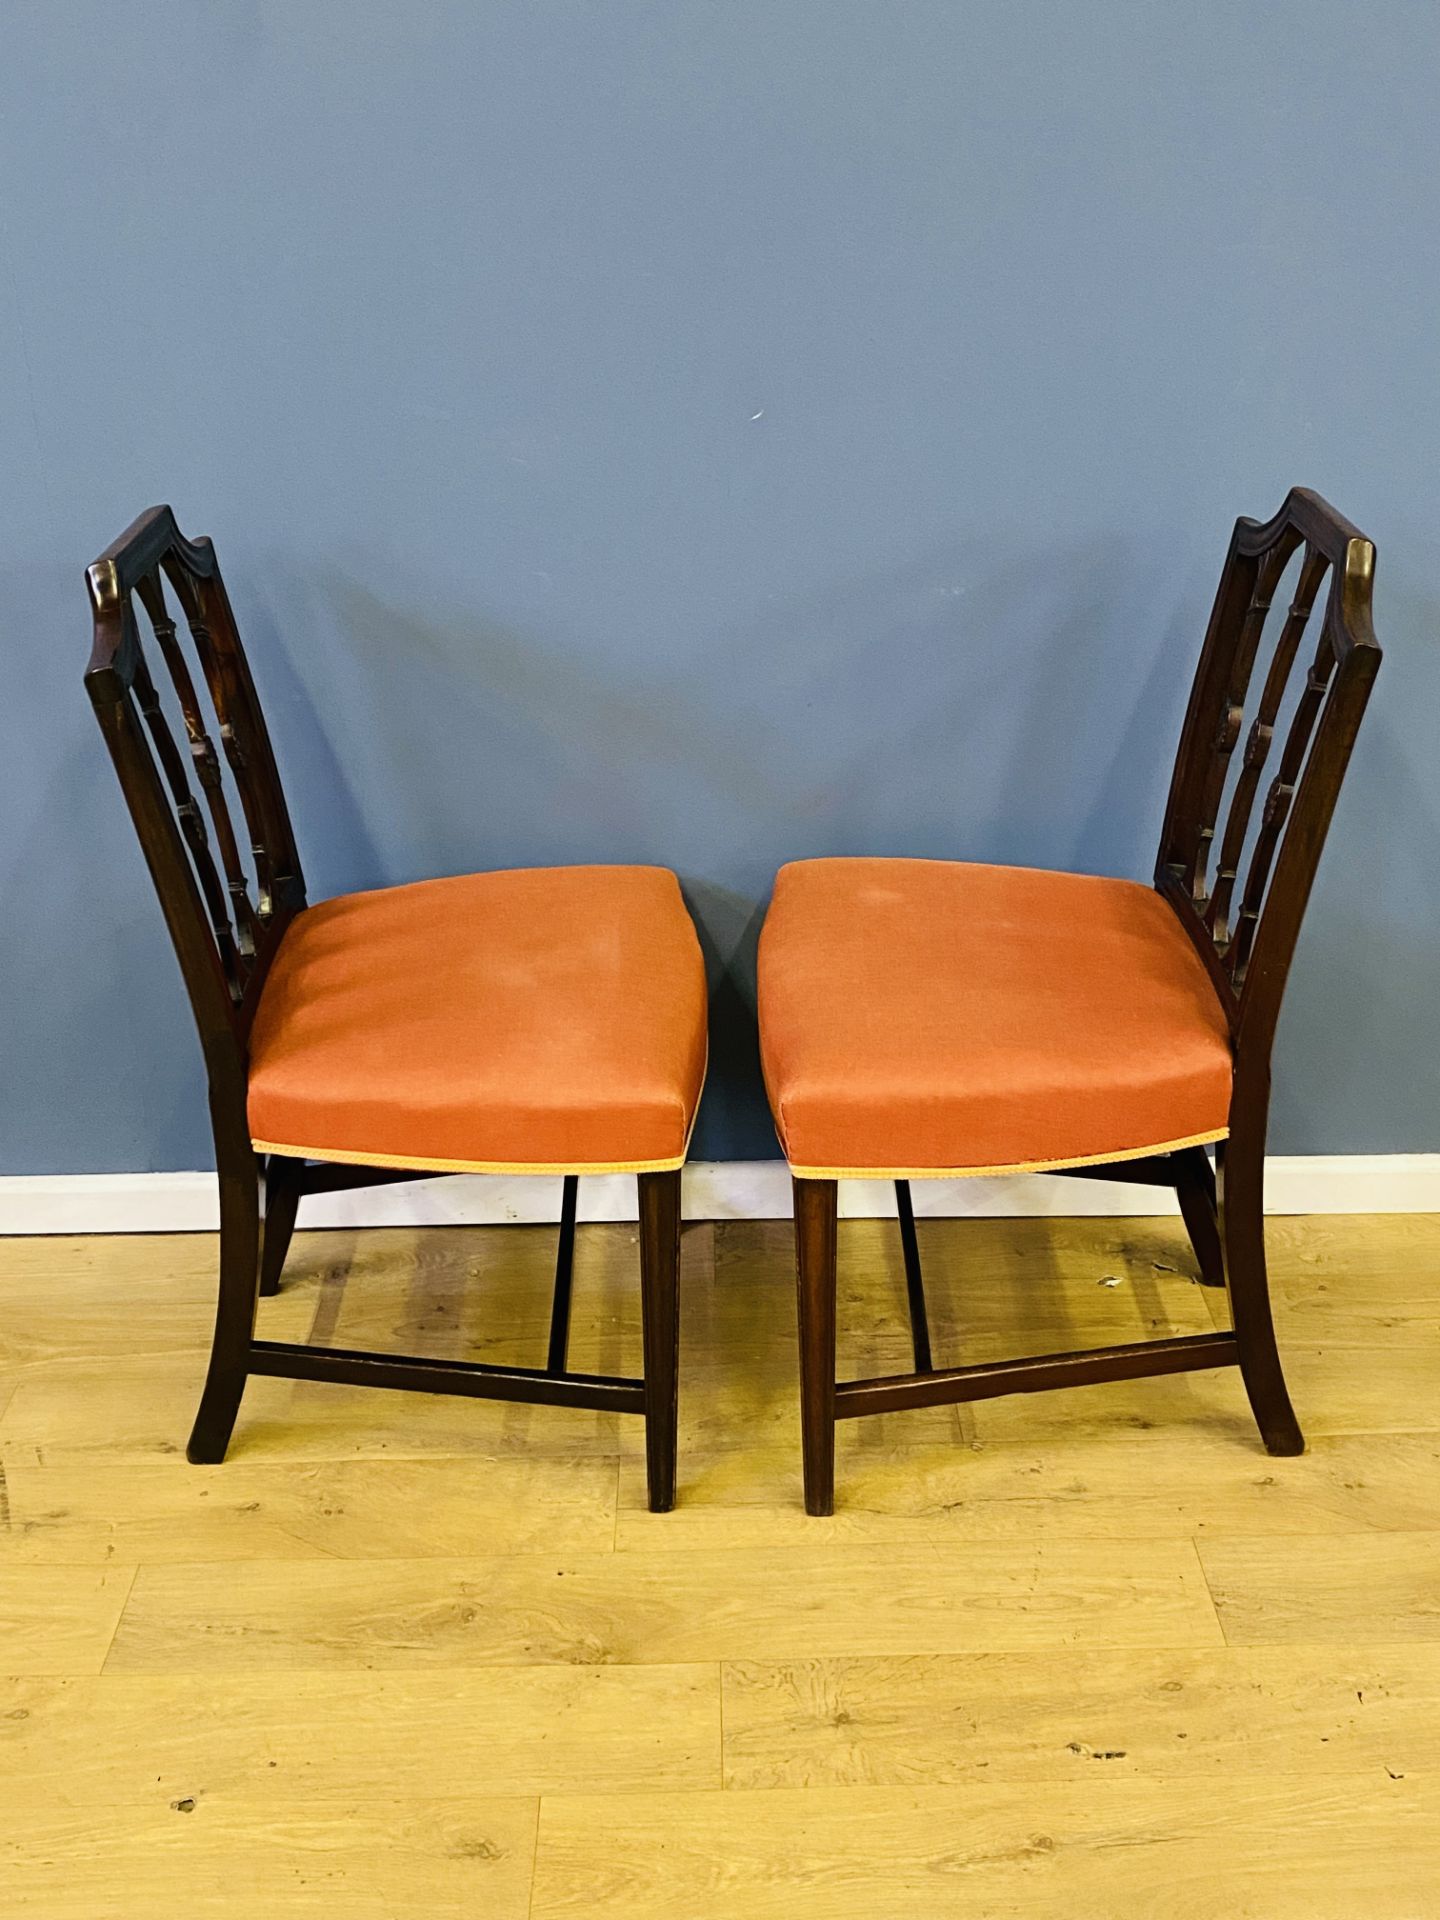 Pair of 19th century mahogany side chairs - Image 6 of 6